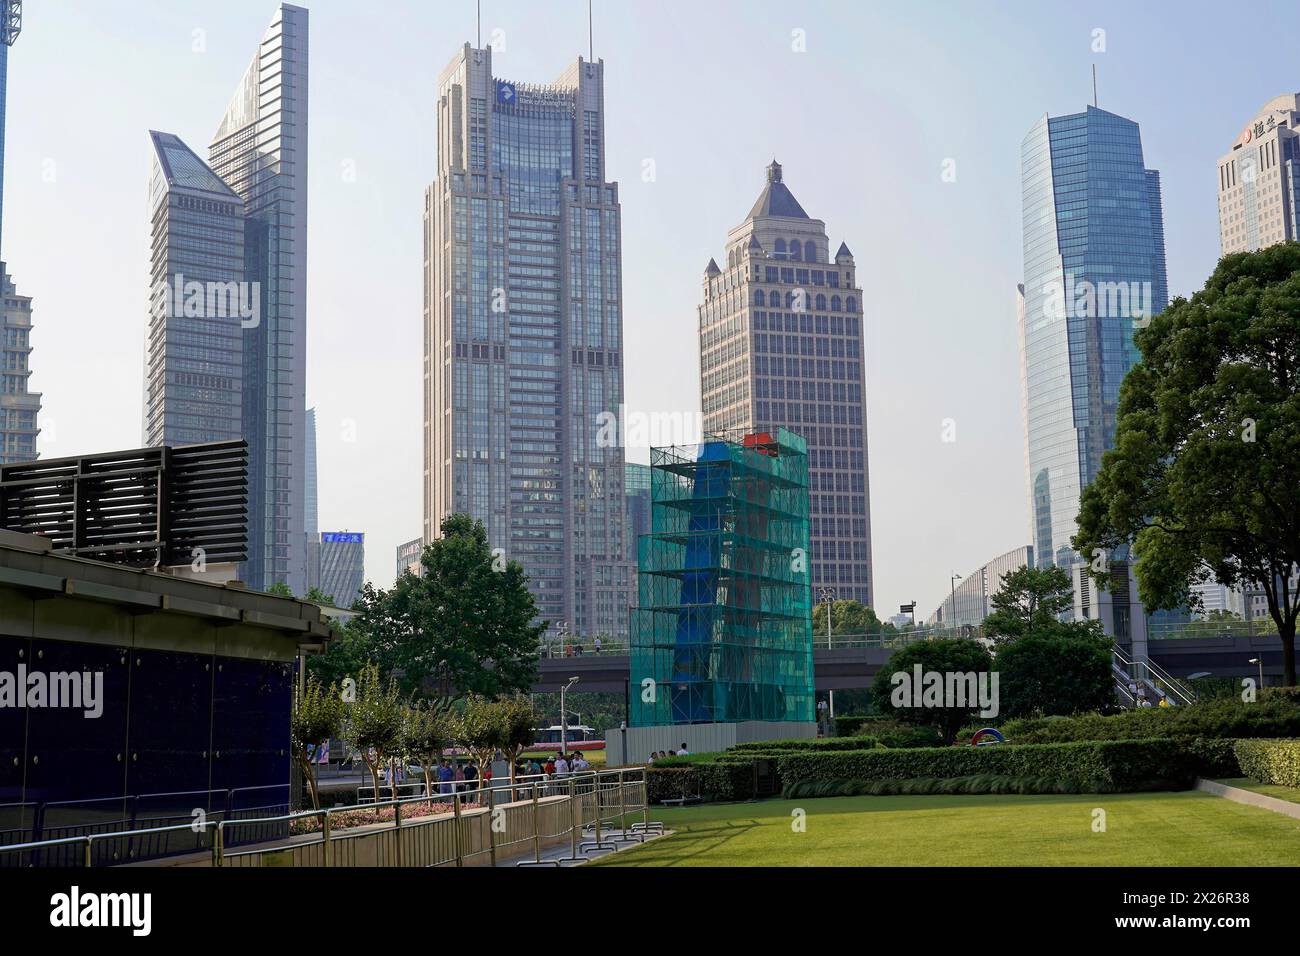 Skyscrapers of Pudong Special Economic Zone, Urban scene with skyscrapers next to green areas under a blue sky, Shanghai, China Stock Photo